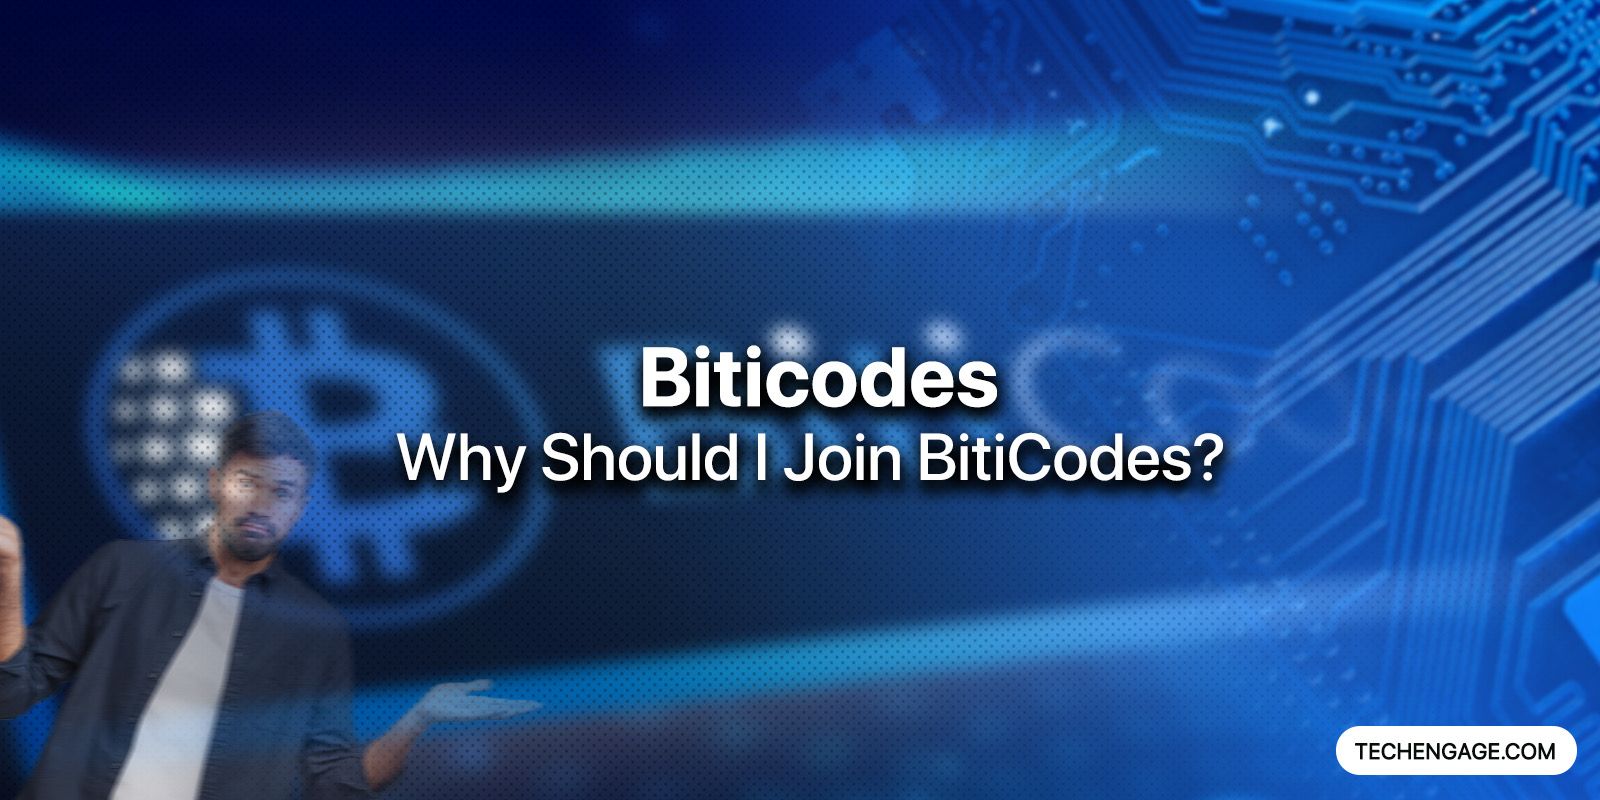 Biticodes – Why Should I Join Biticodes?